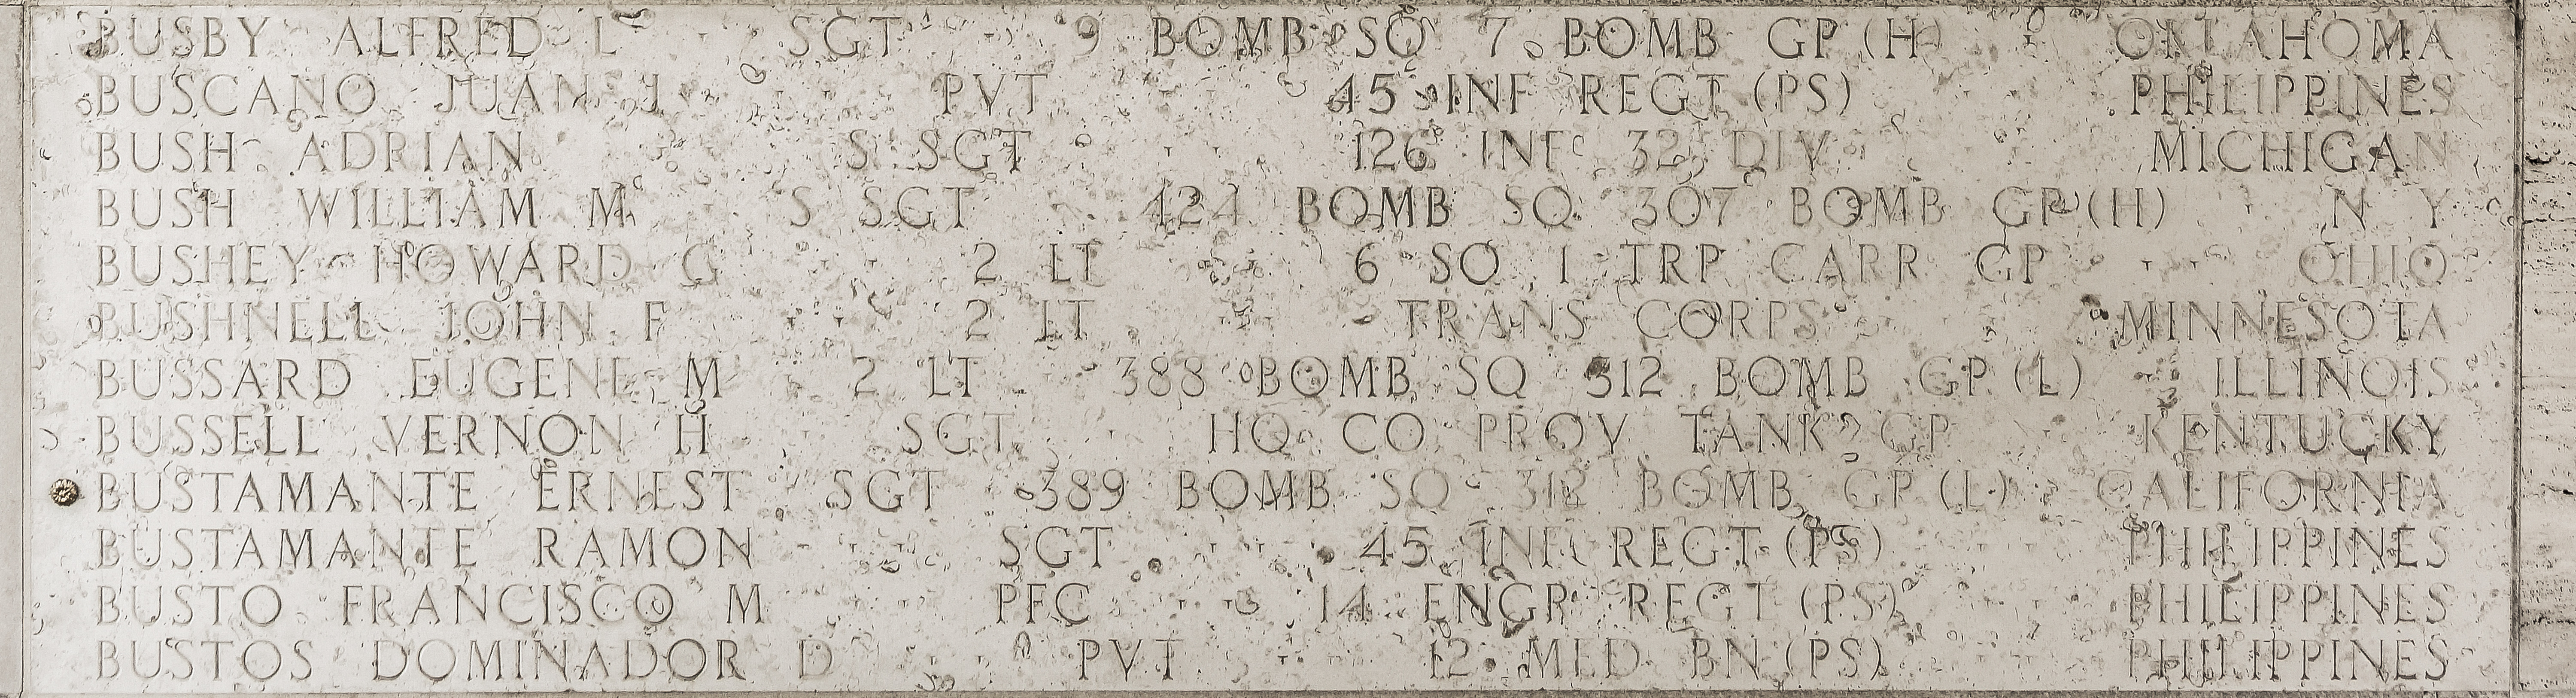 Francisco M. Busto, Private First Class